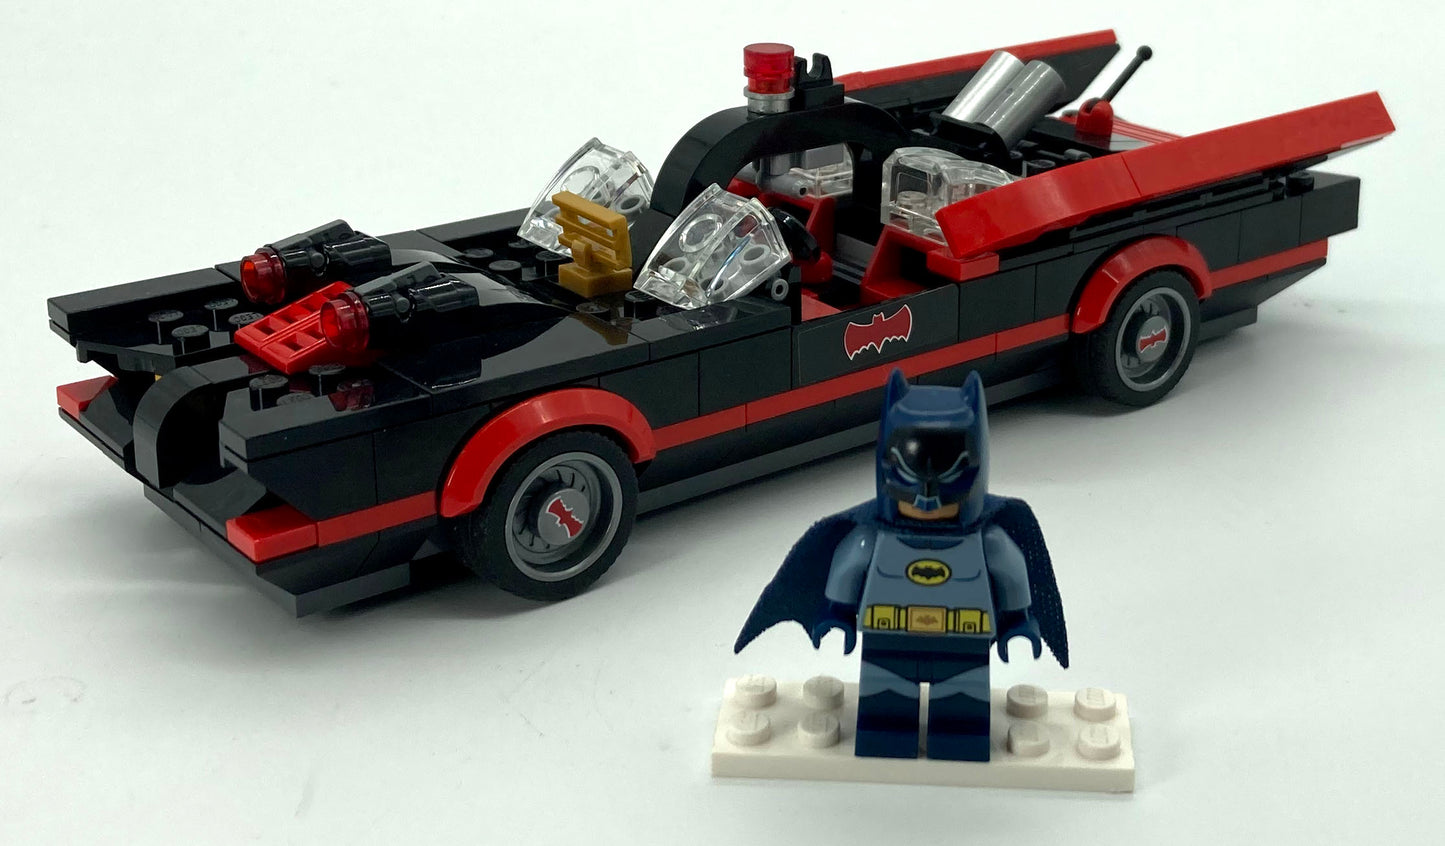 Used Set - Vintage Batmobile from 76052 Batcave (No Instruction Manual or Box)